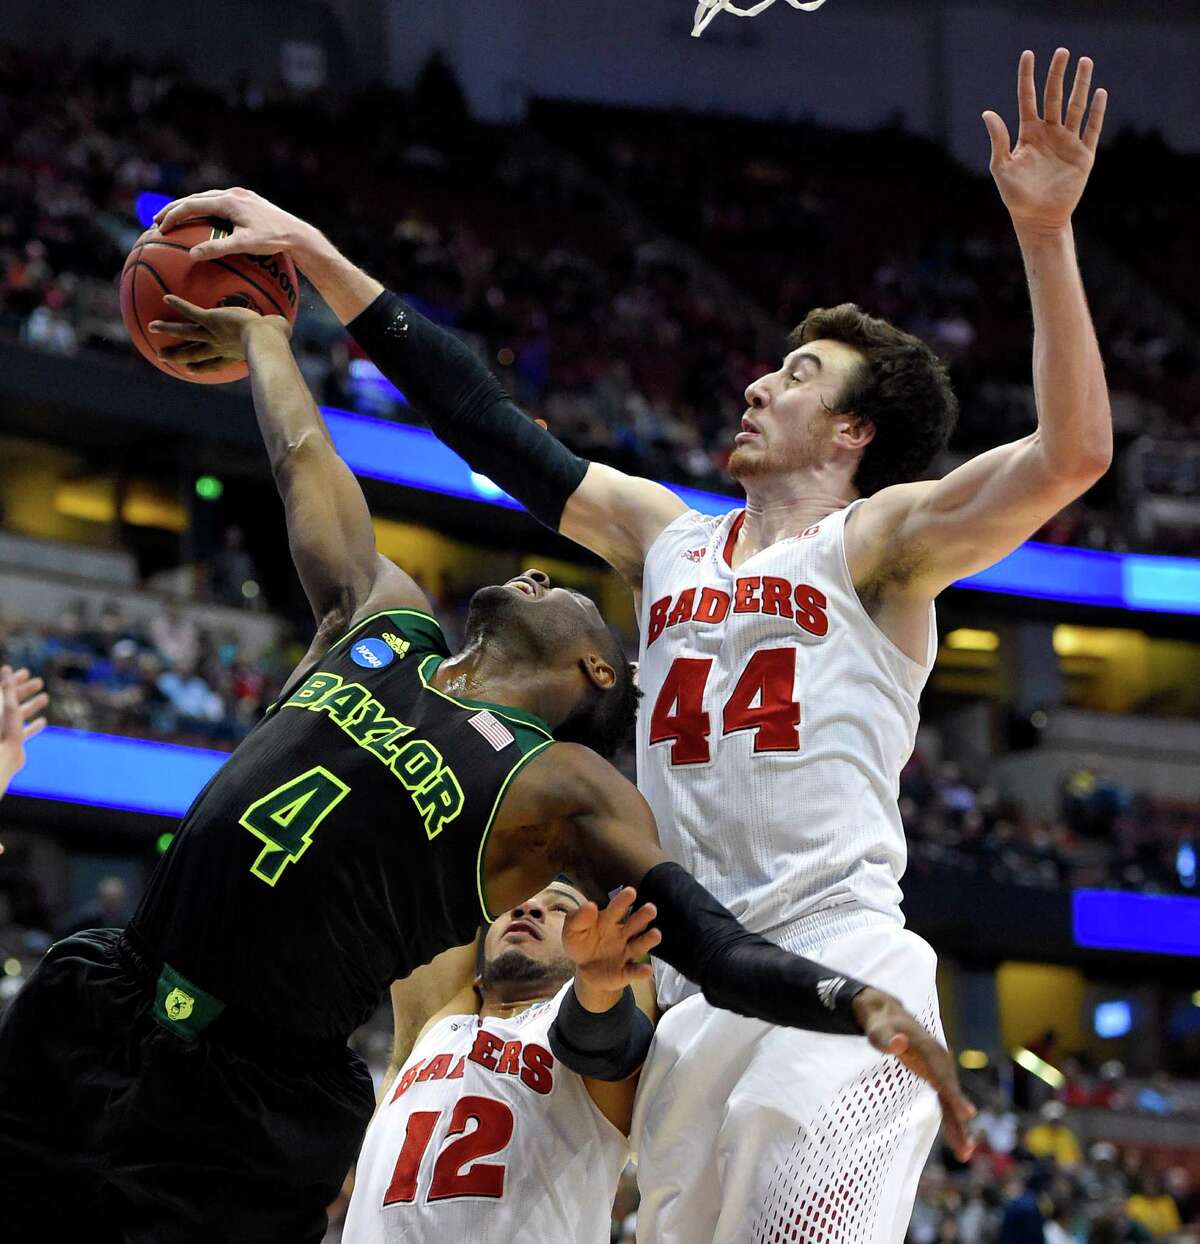 Baylor guard Gary Franklin (4) has a shot stopped by Wisconsin forward Frank Kaminsky (44) during an NCAA men's college basketball tournament regional semifinal, Thursday, March 27, 2014, in Anaheim, Calif. (AP Photo/Mark J. Terrill) ORG XMIT: CACC212